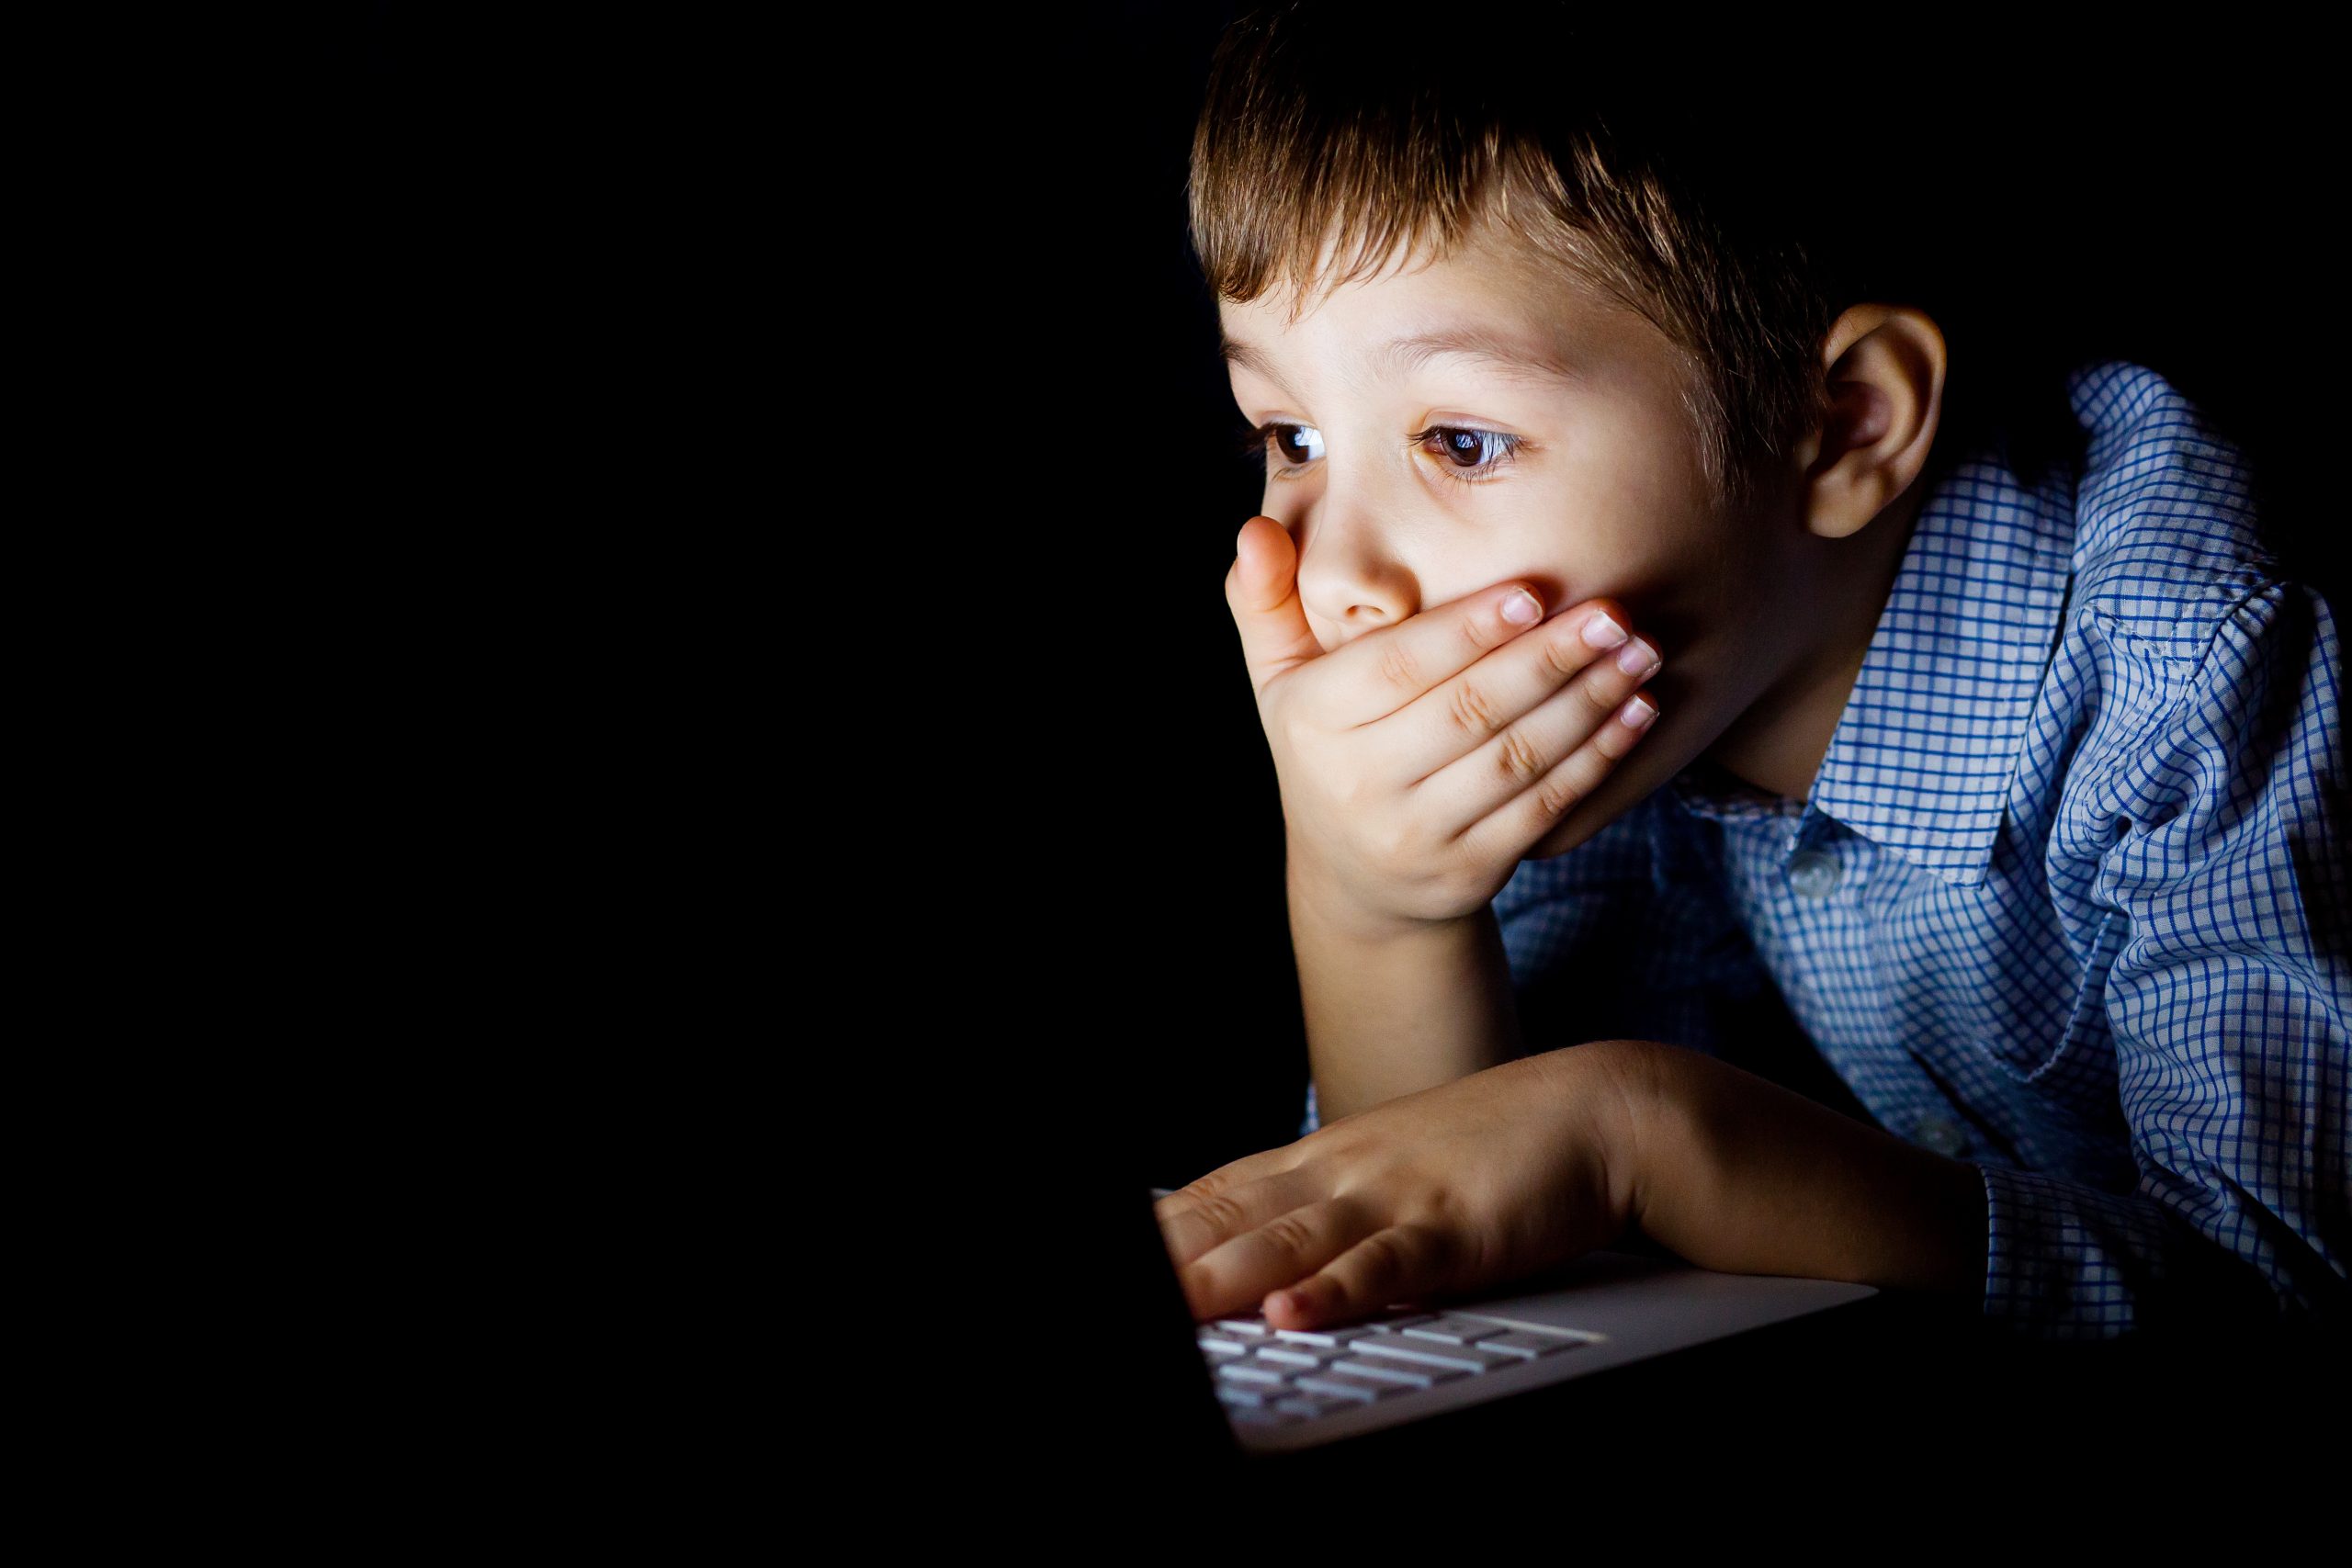 ACTION  ALERT: Protect South Dakota Children from accessing porn!